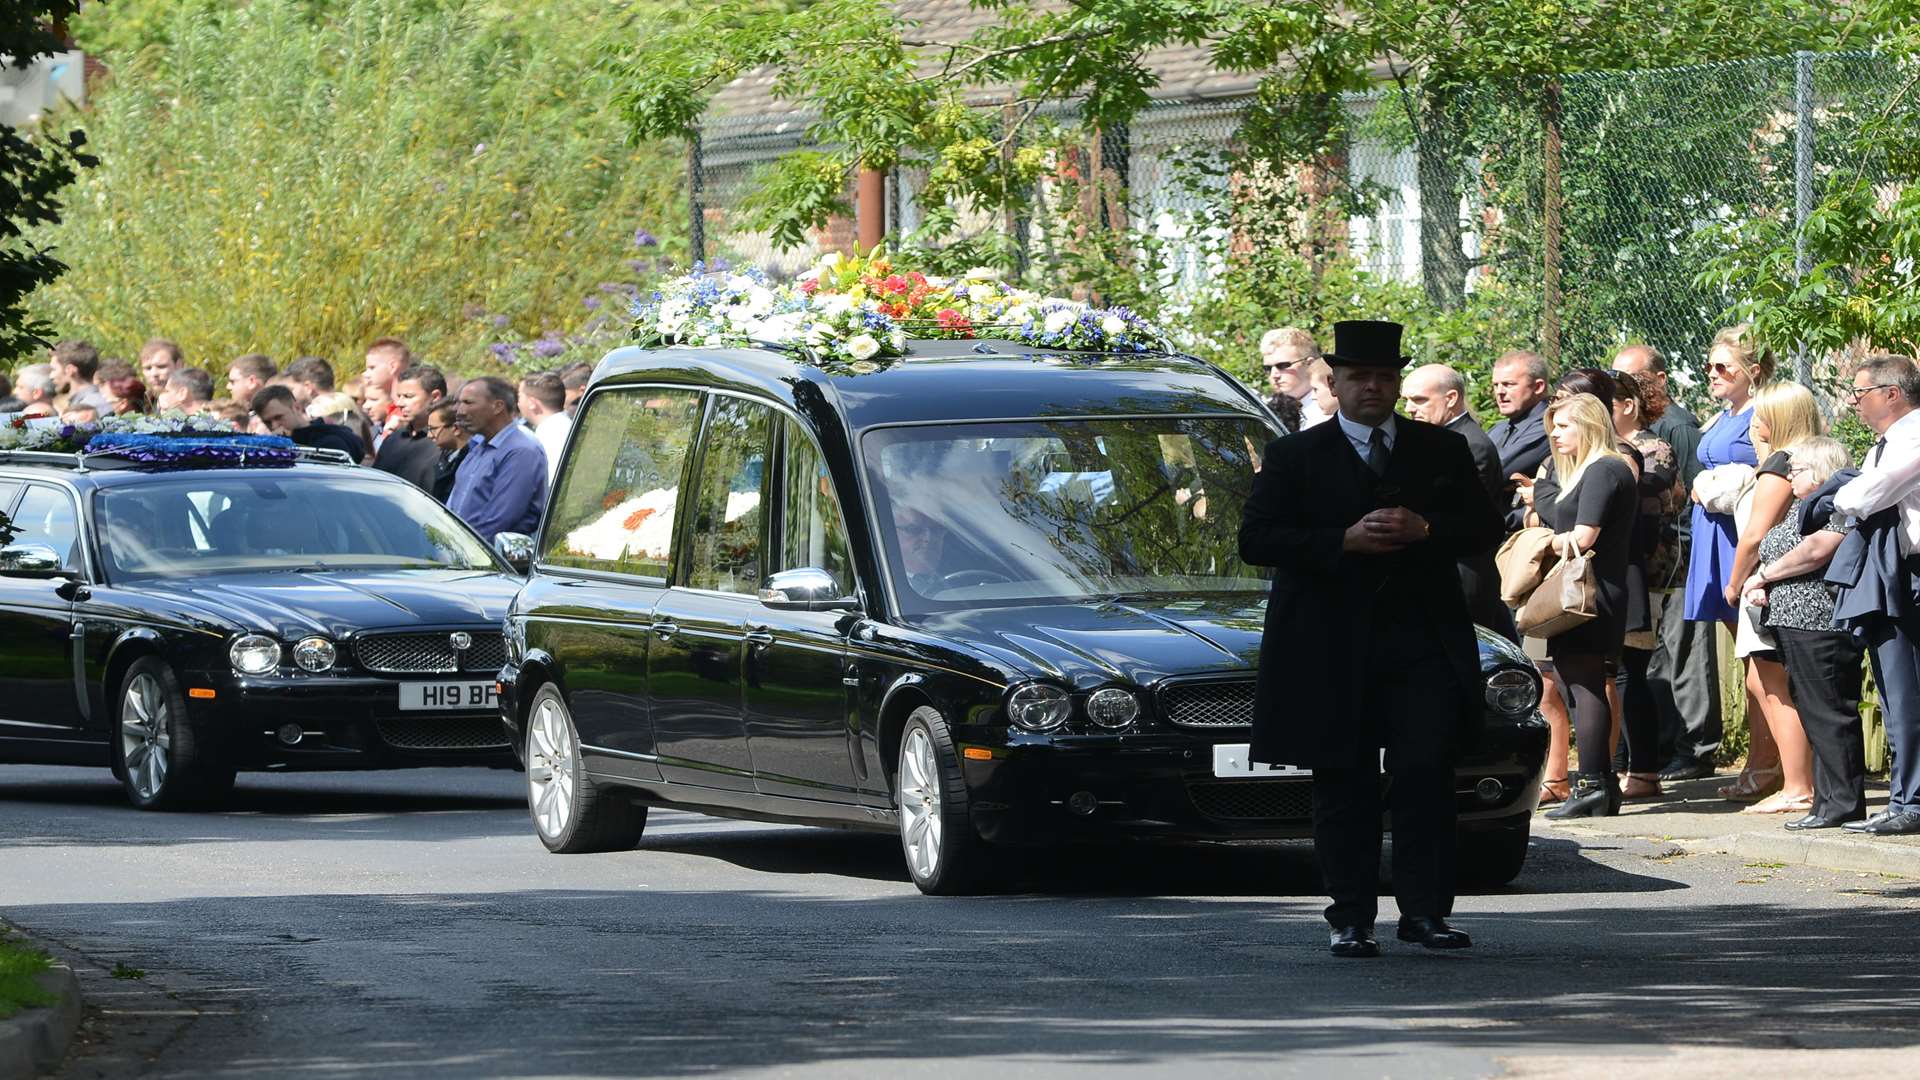 Mourners stood in silence as the hearse arrived